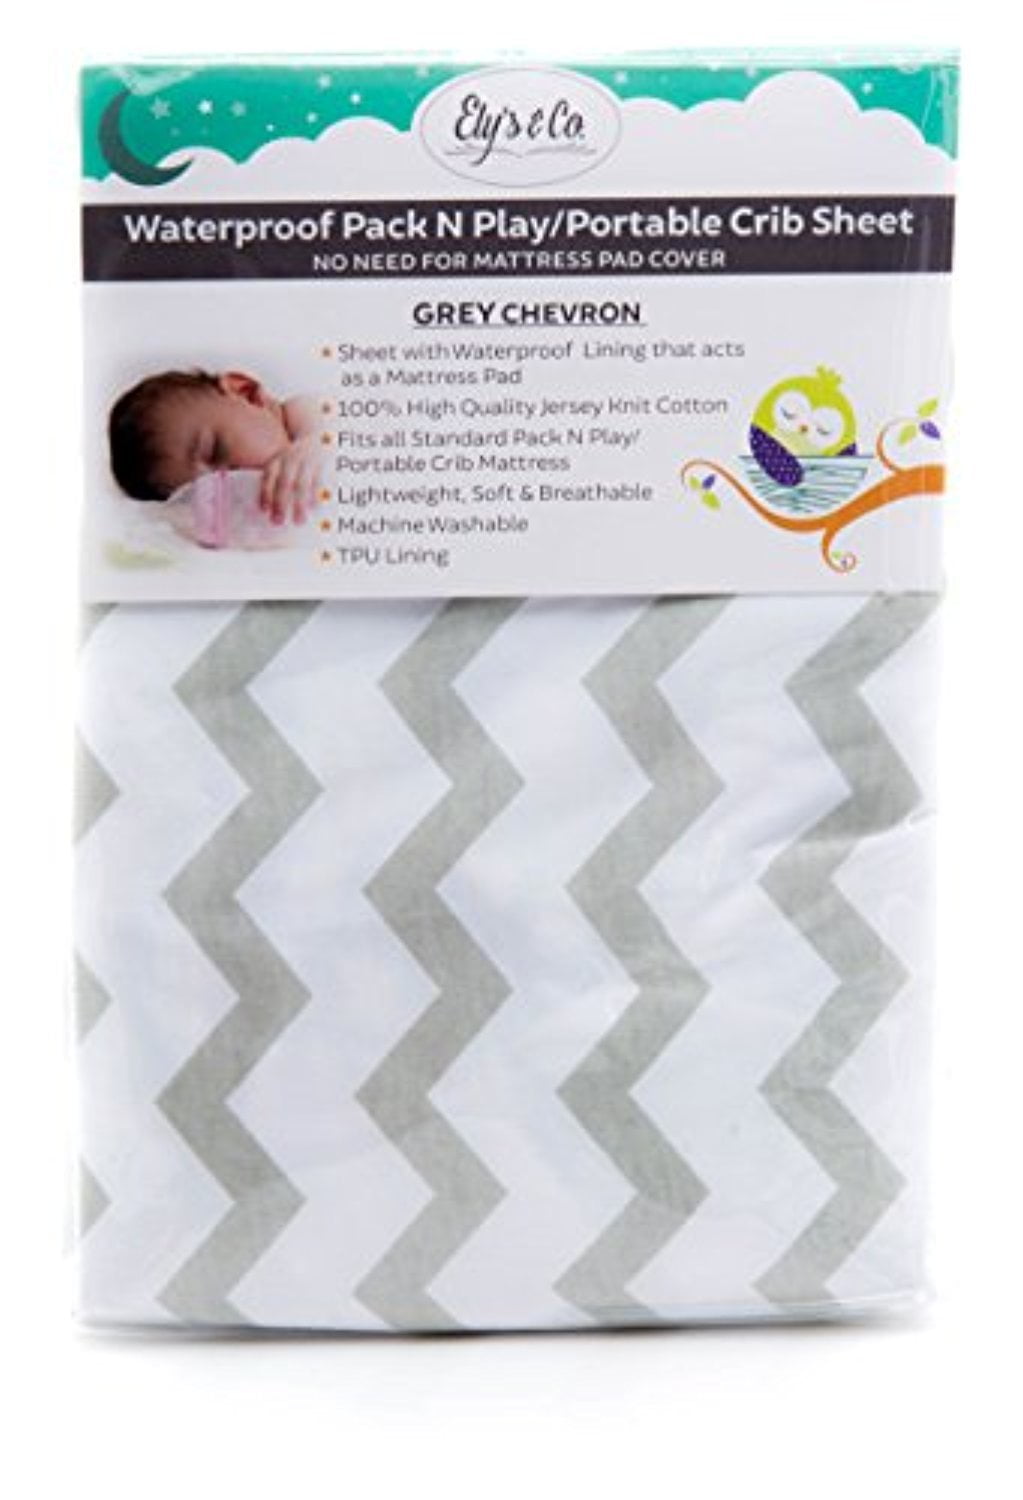 Pink by Elys & Co. New Revised Fit with Added Heat Protection |All in one Mattress Pad Cover and Cozy Sheet Waterproof Cotton Quilted Pack n Play Sheet Mini Crib Sheet 